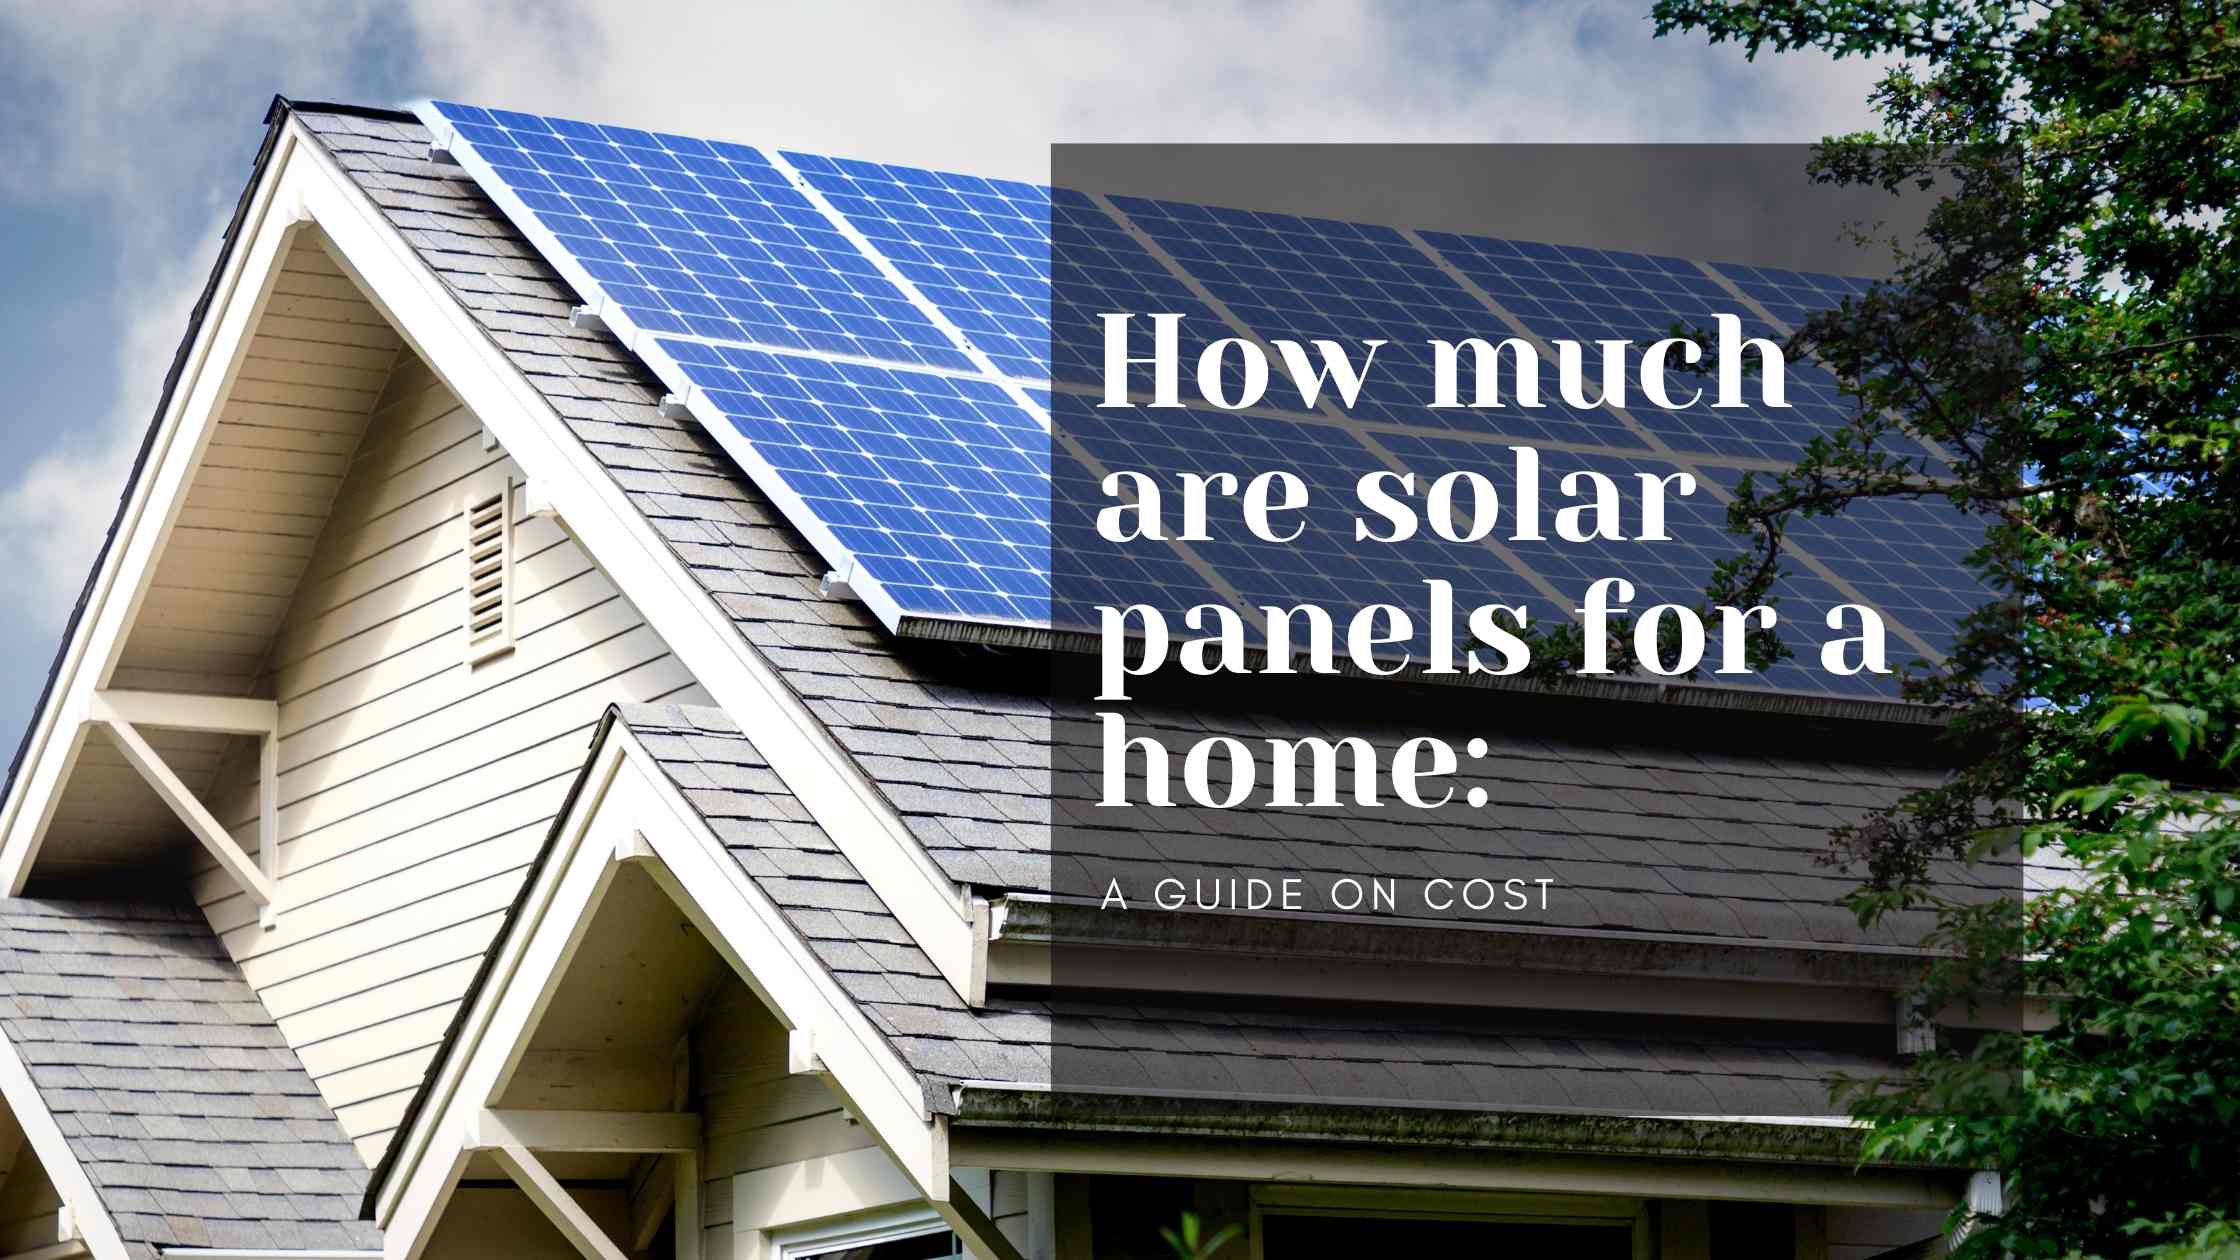 How much are solar panels for a home